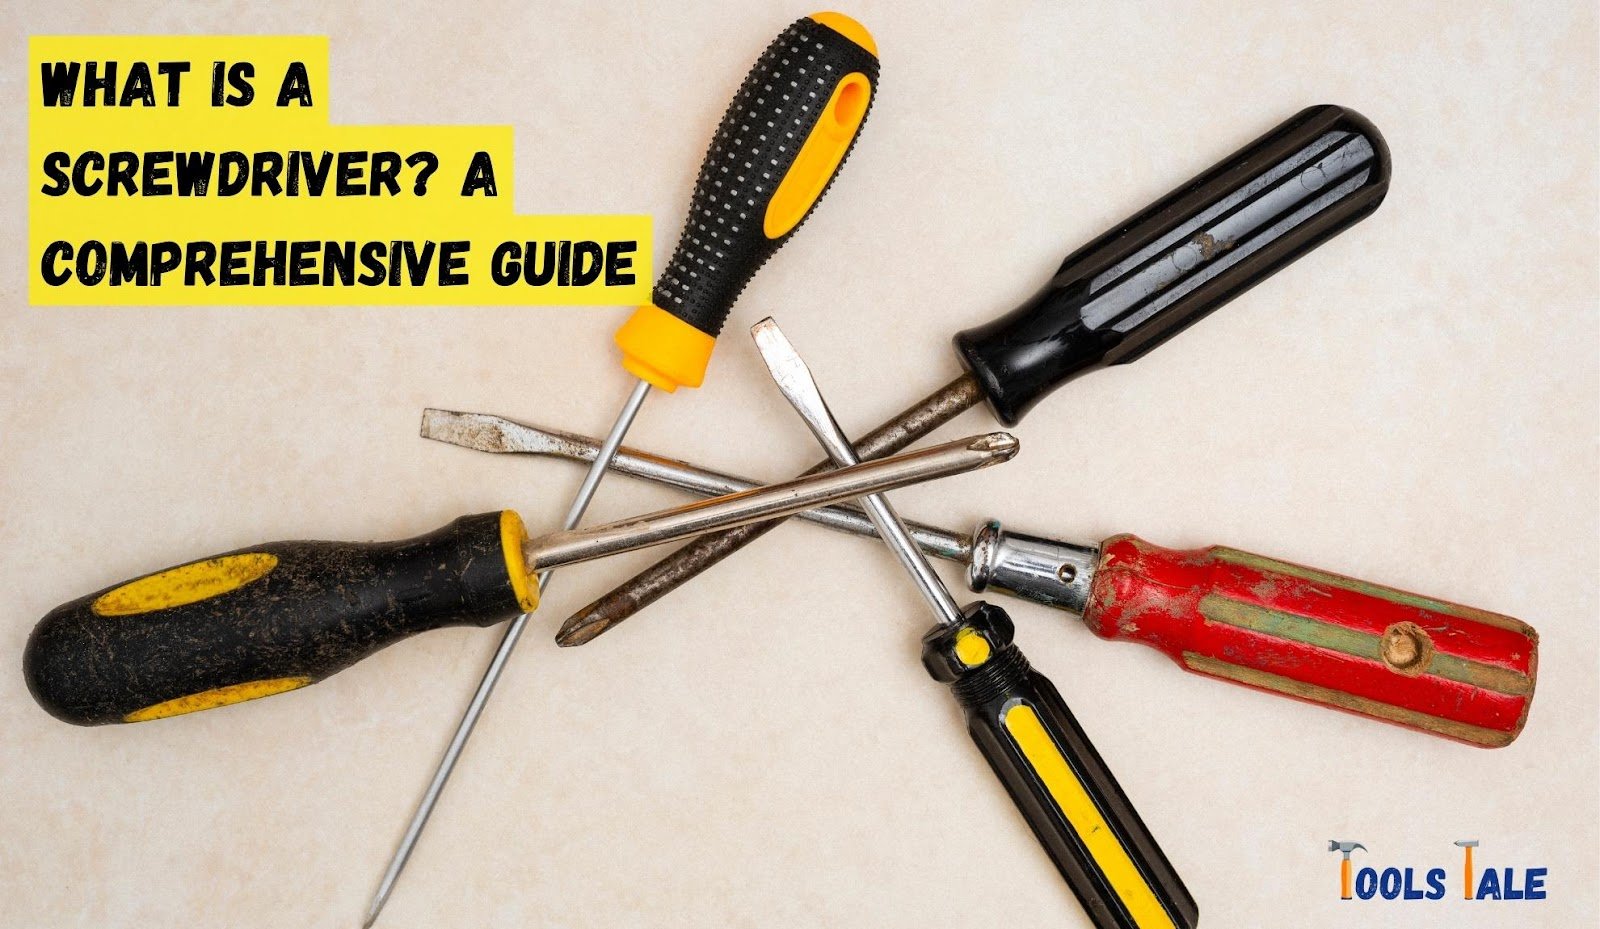 What is a screwdriver